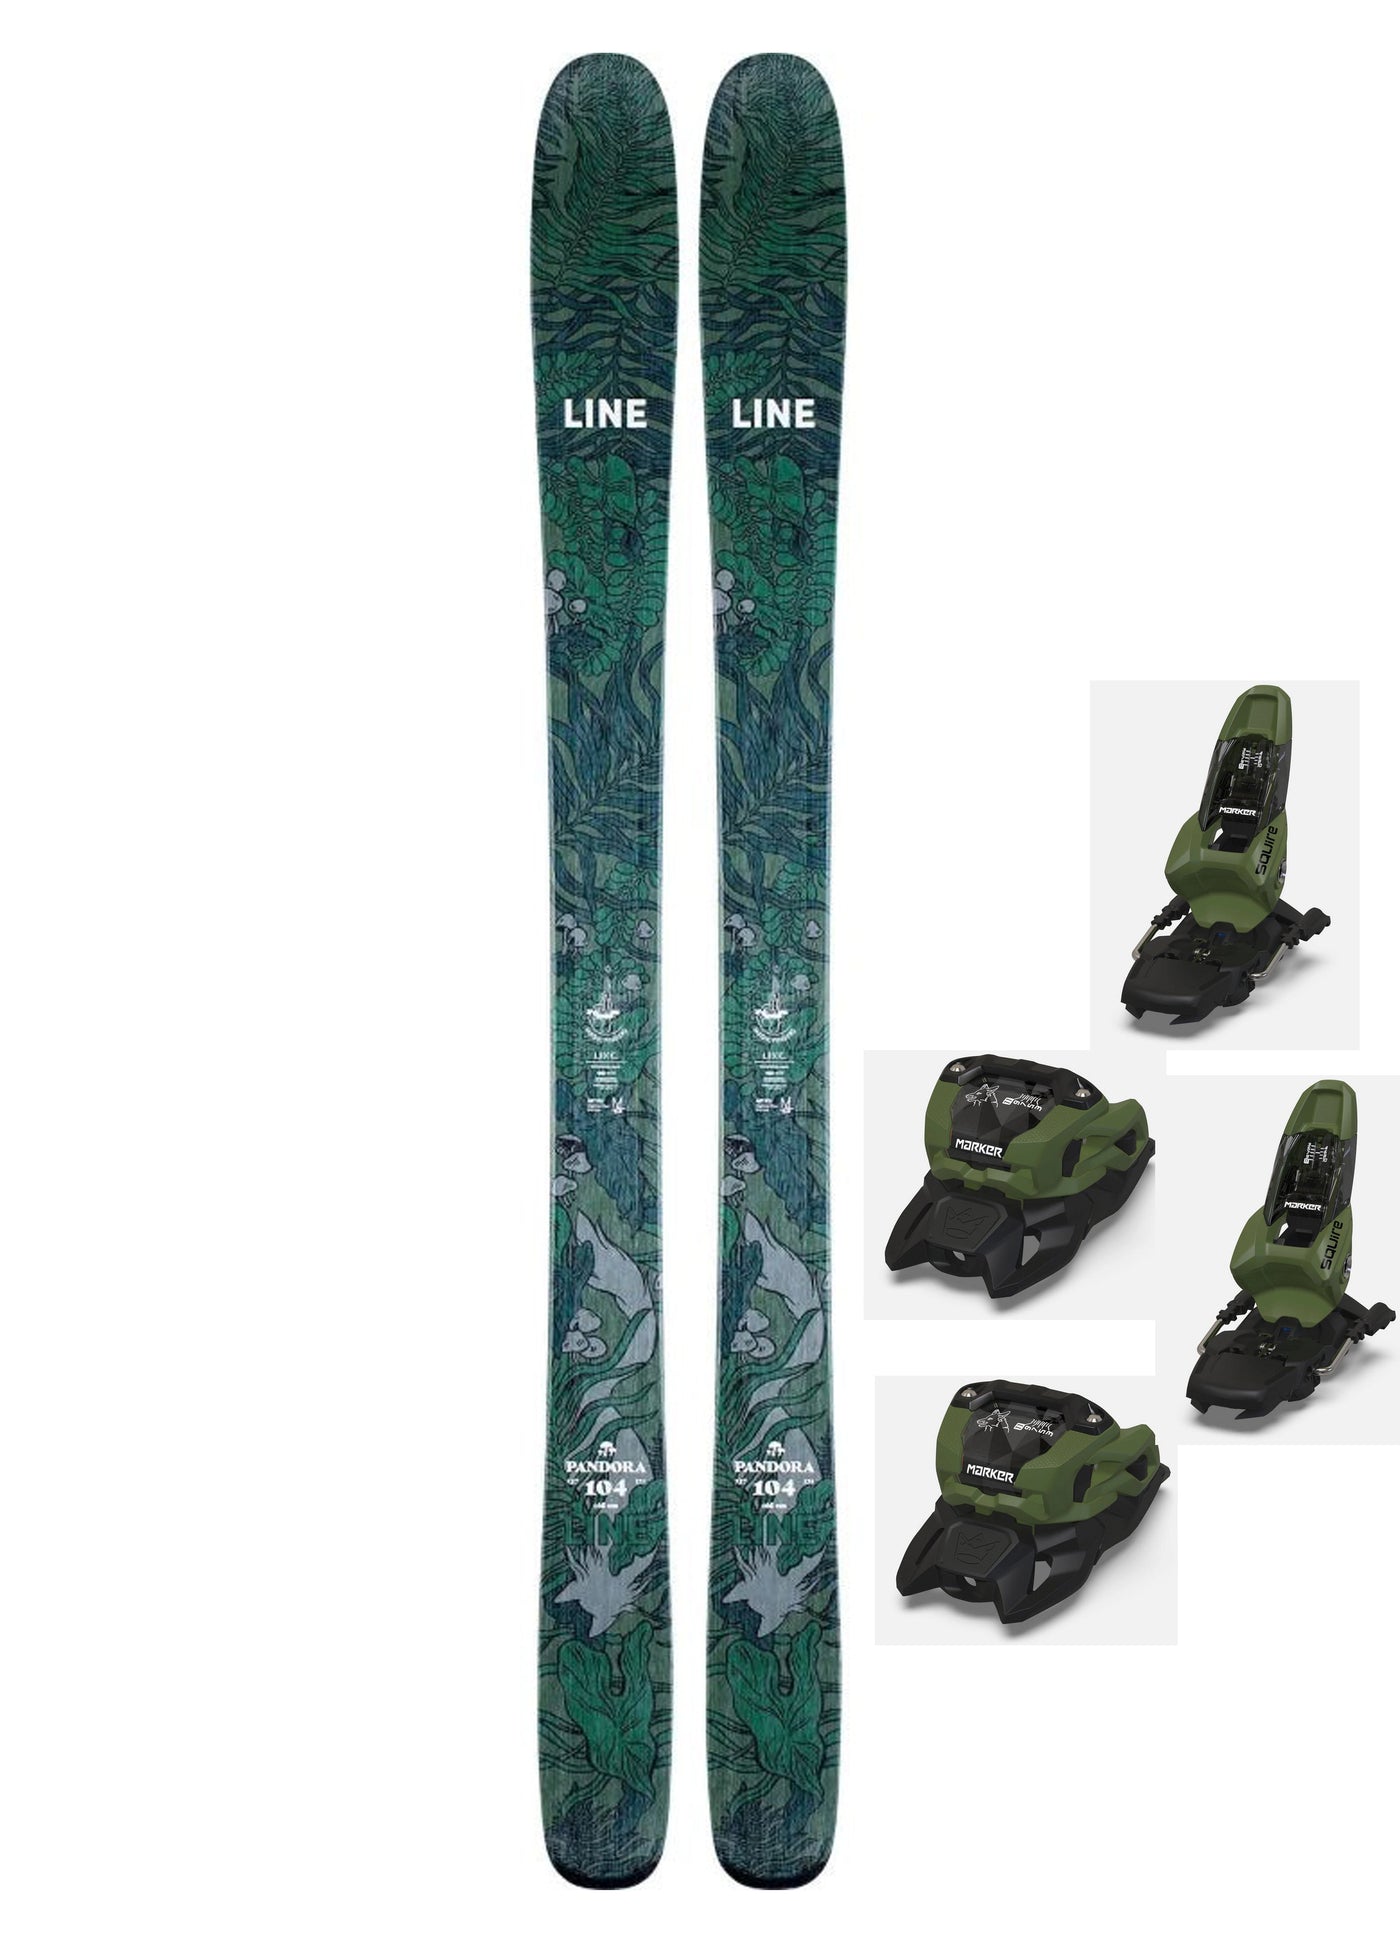 LINE Skis PANDORA 110, 170cm Skis, Includes Marker Squire 11 Bindings